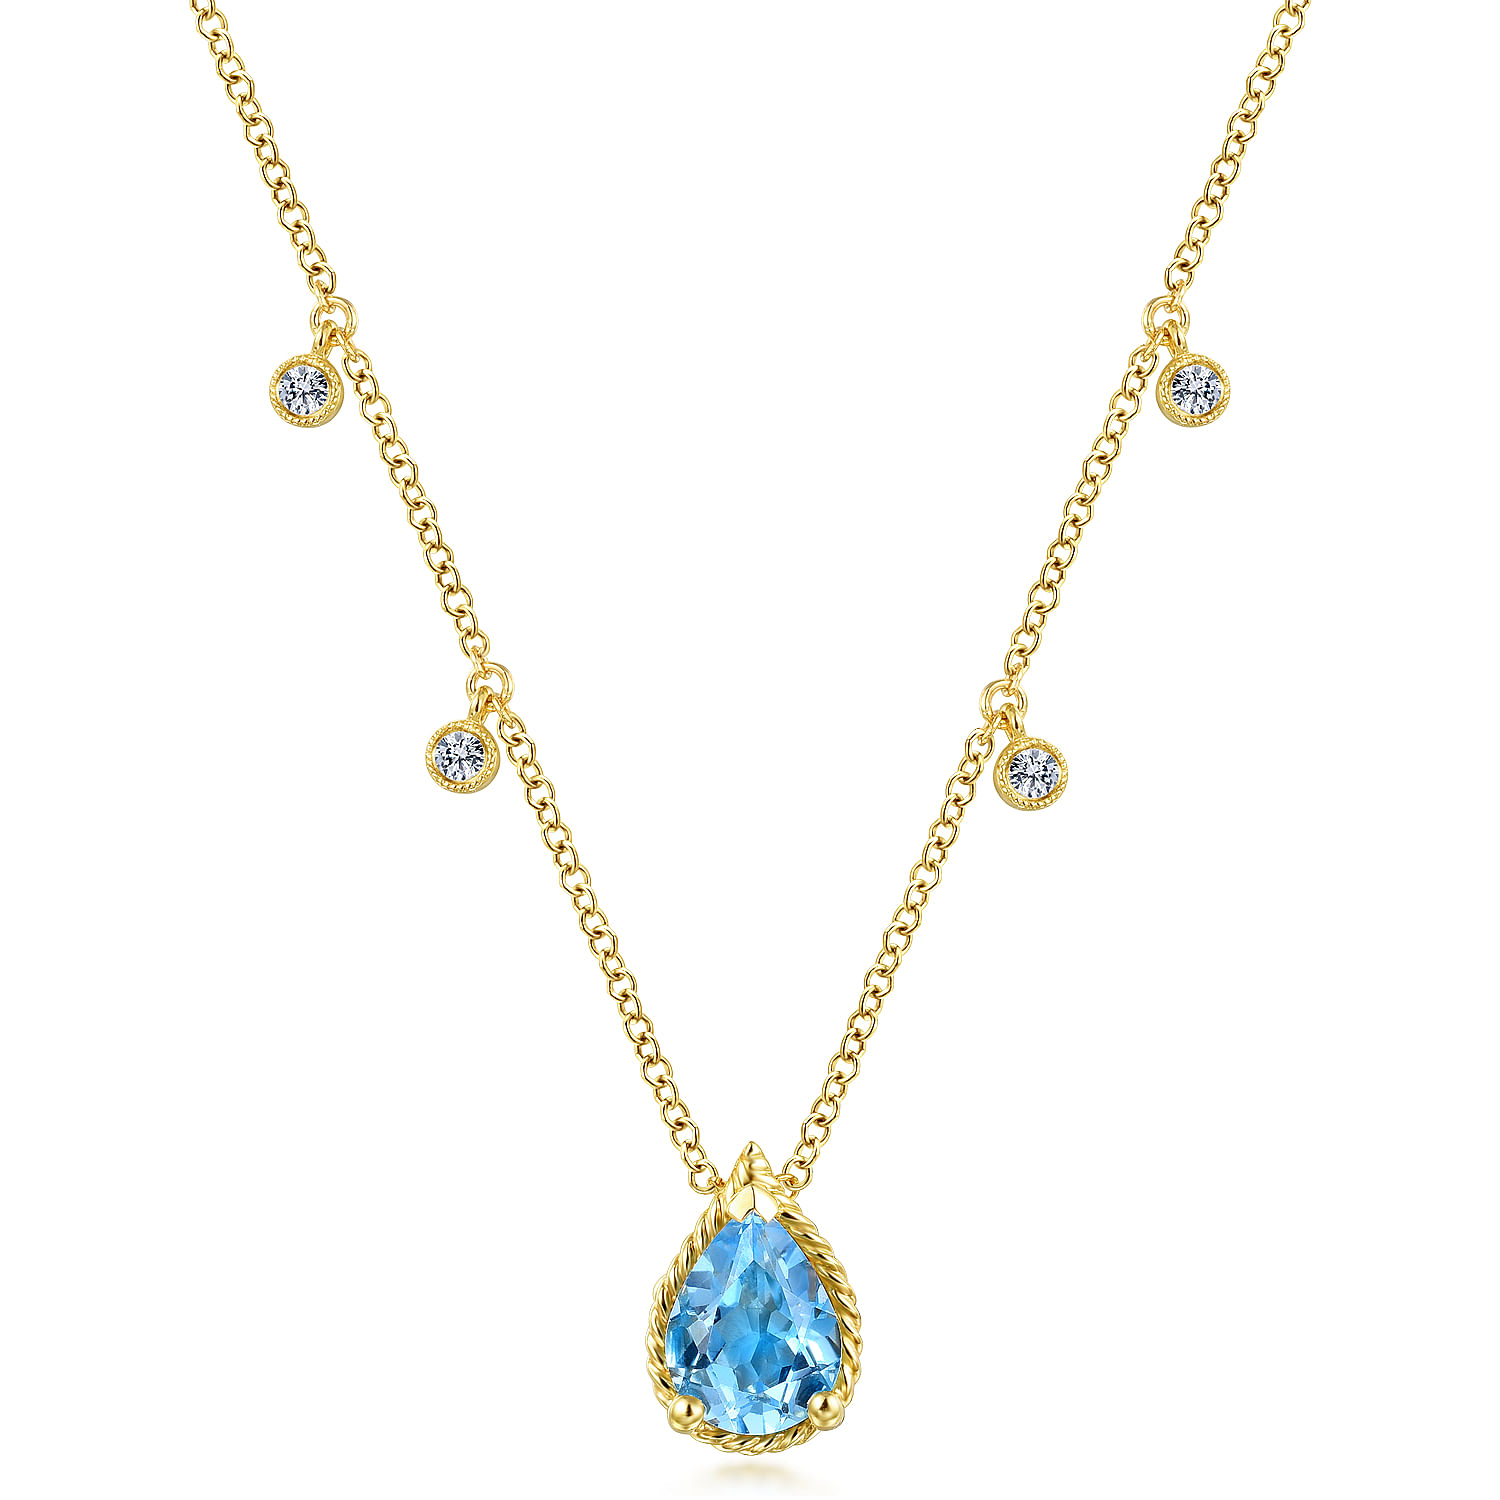 14K Yellow Gold Pear Shape Blue Topaz Pendant Necklace with Diamond Side Drops